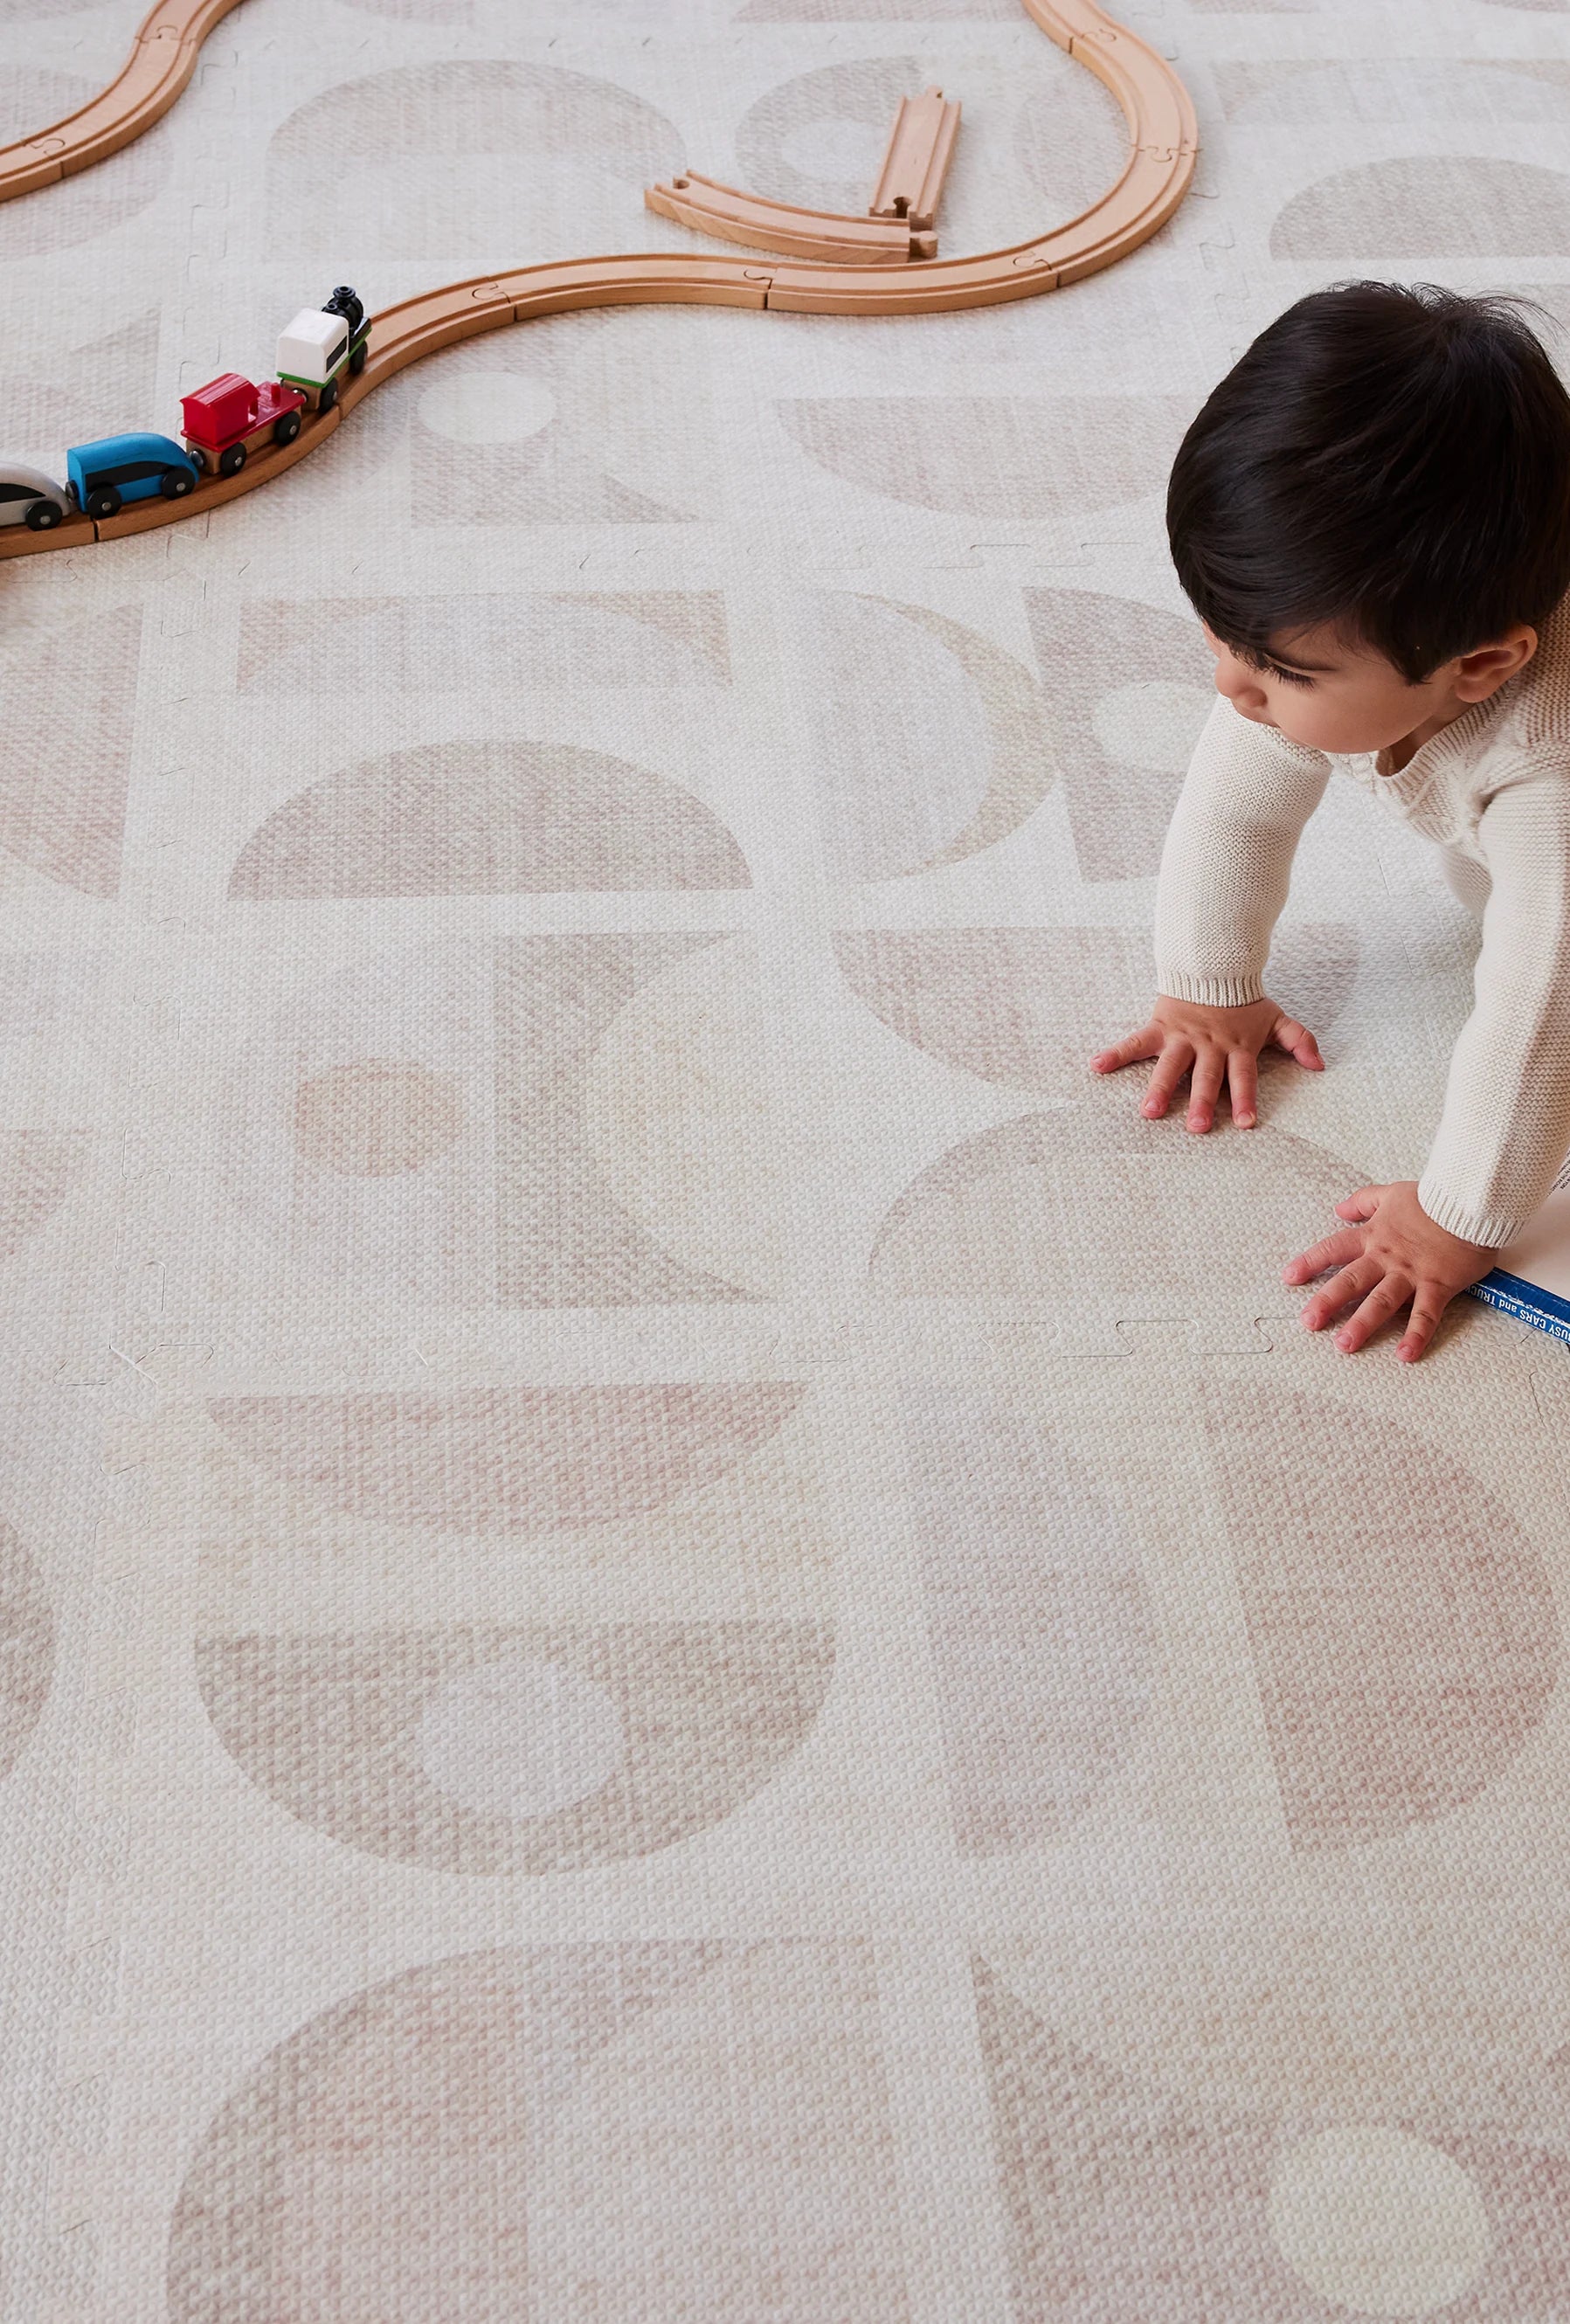 Luna sandstone play mat with baby boy playing crawling across the mat with wooden train tracks in the corner  